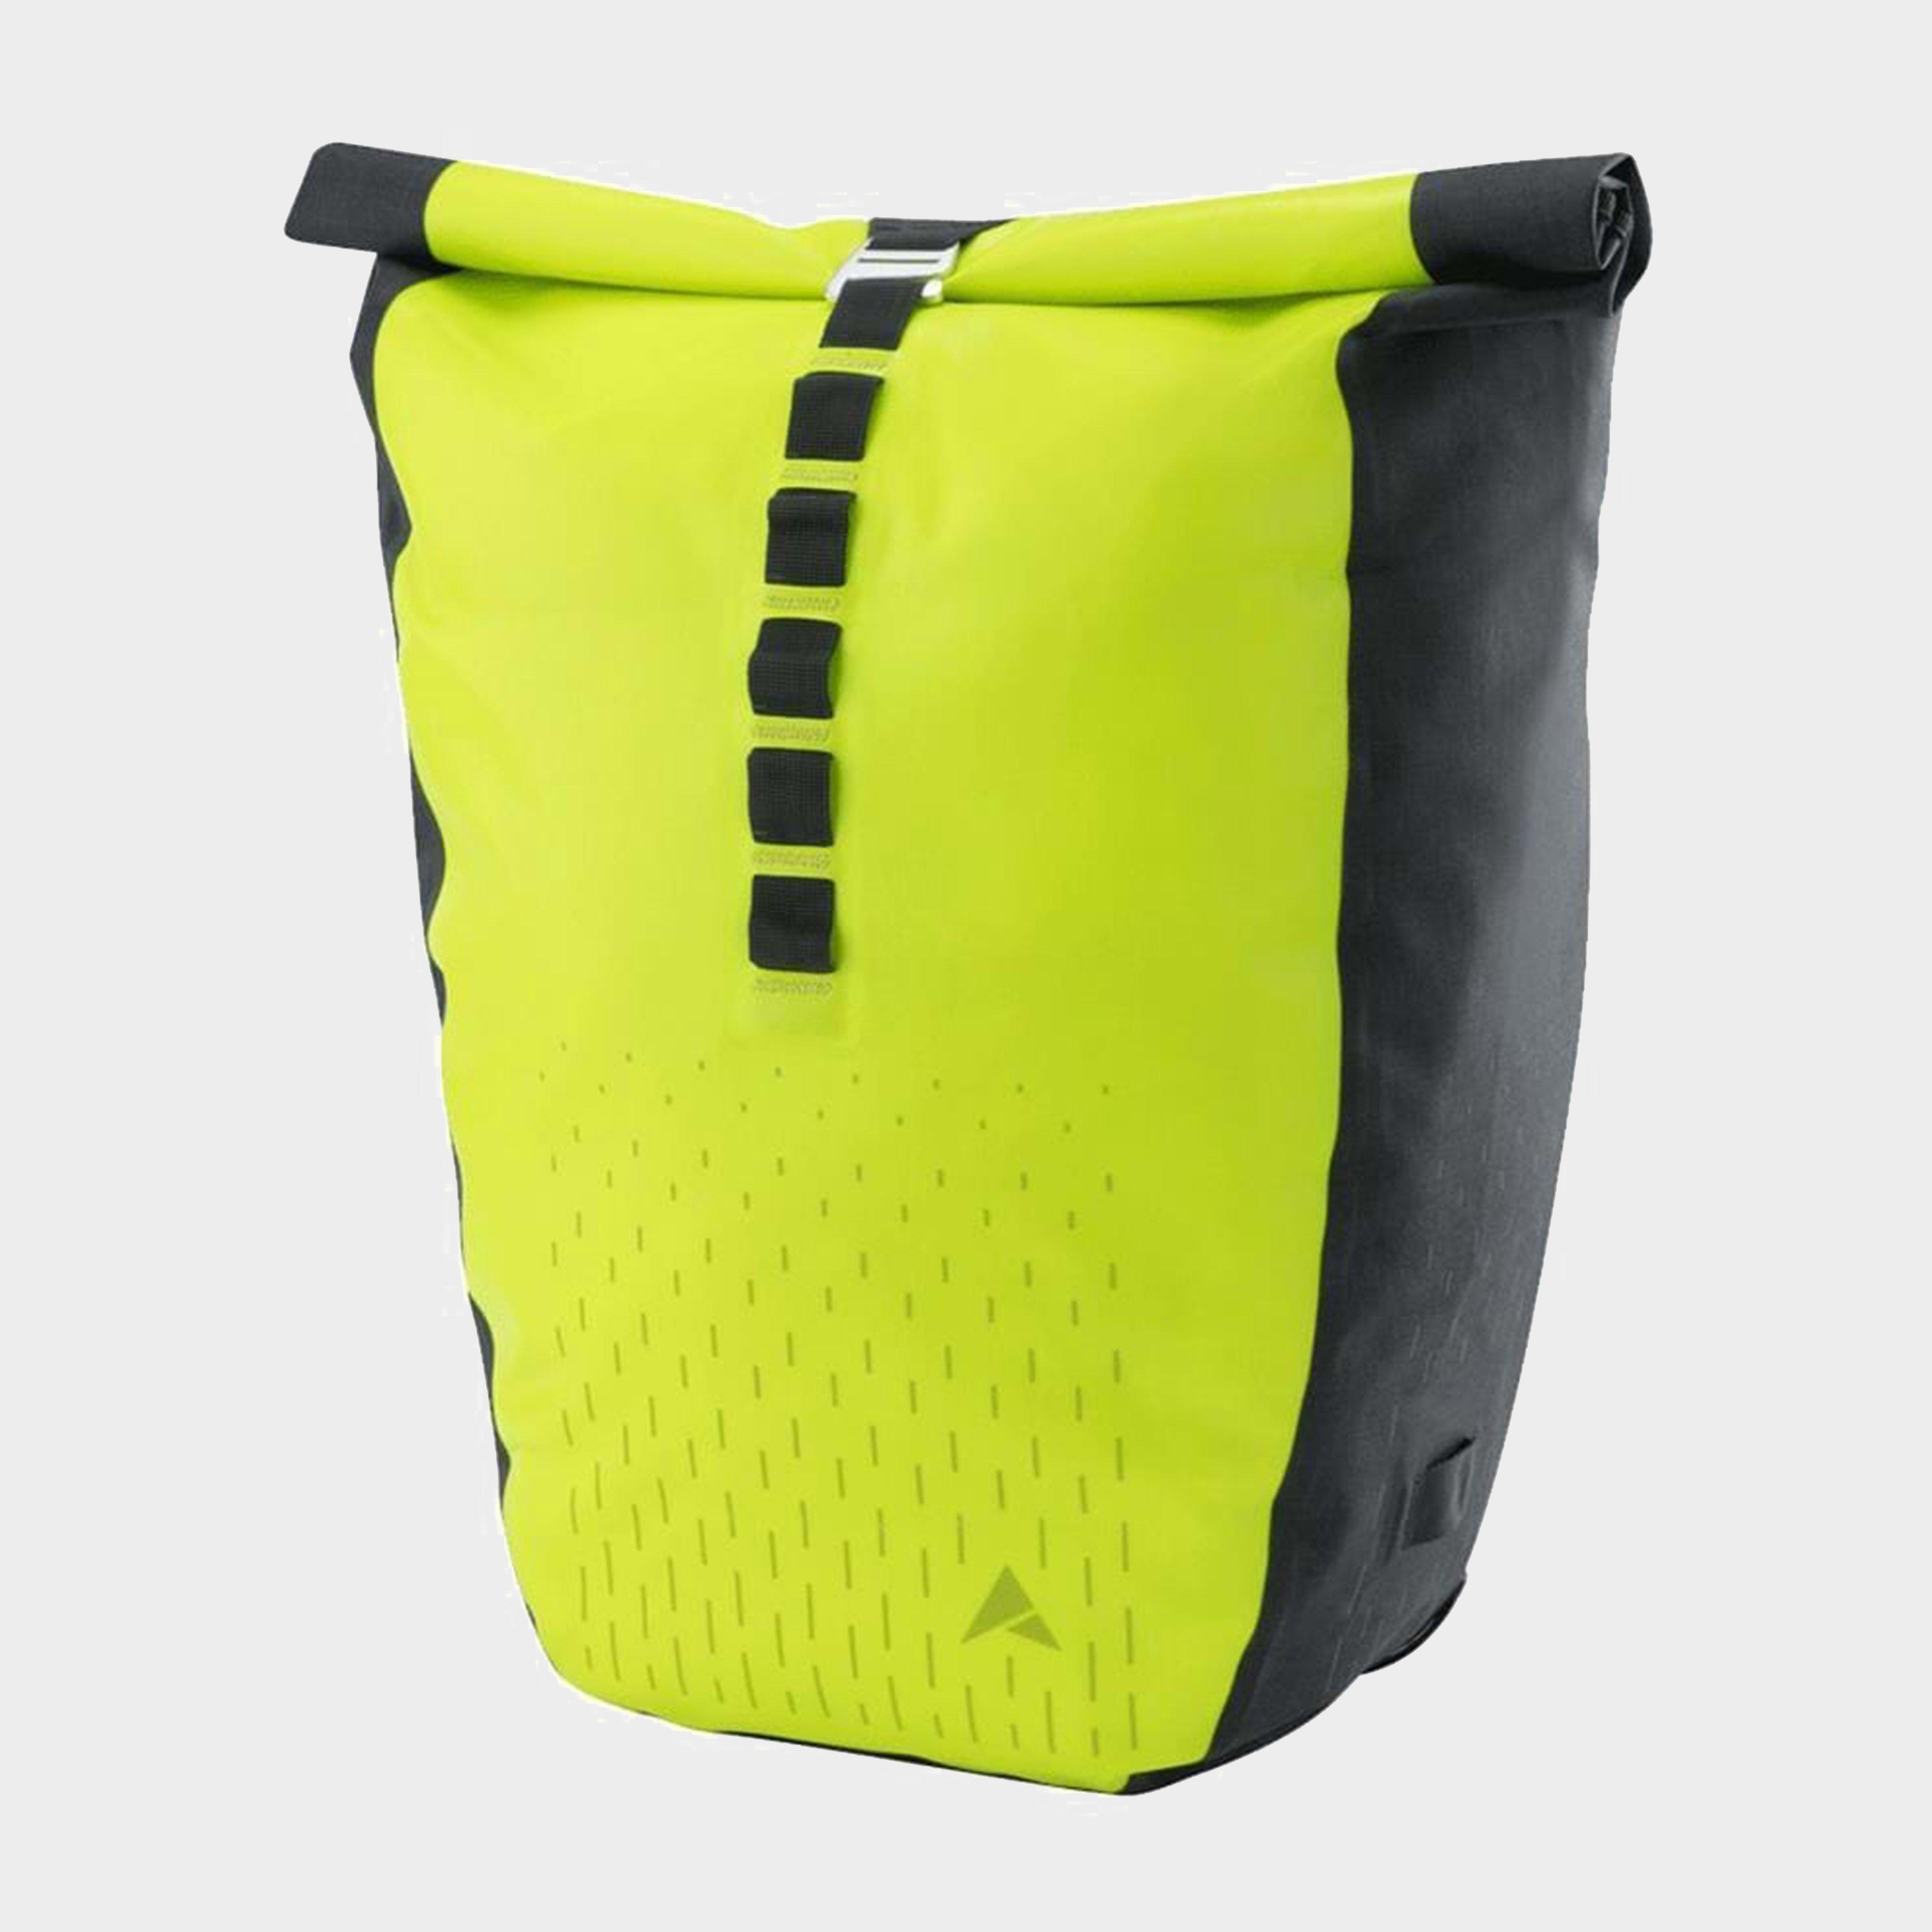 Altura Vortex 2 Waterproof Seatpack - Gry/gry  Gry/gry